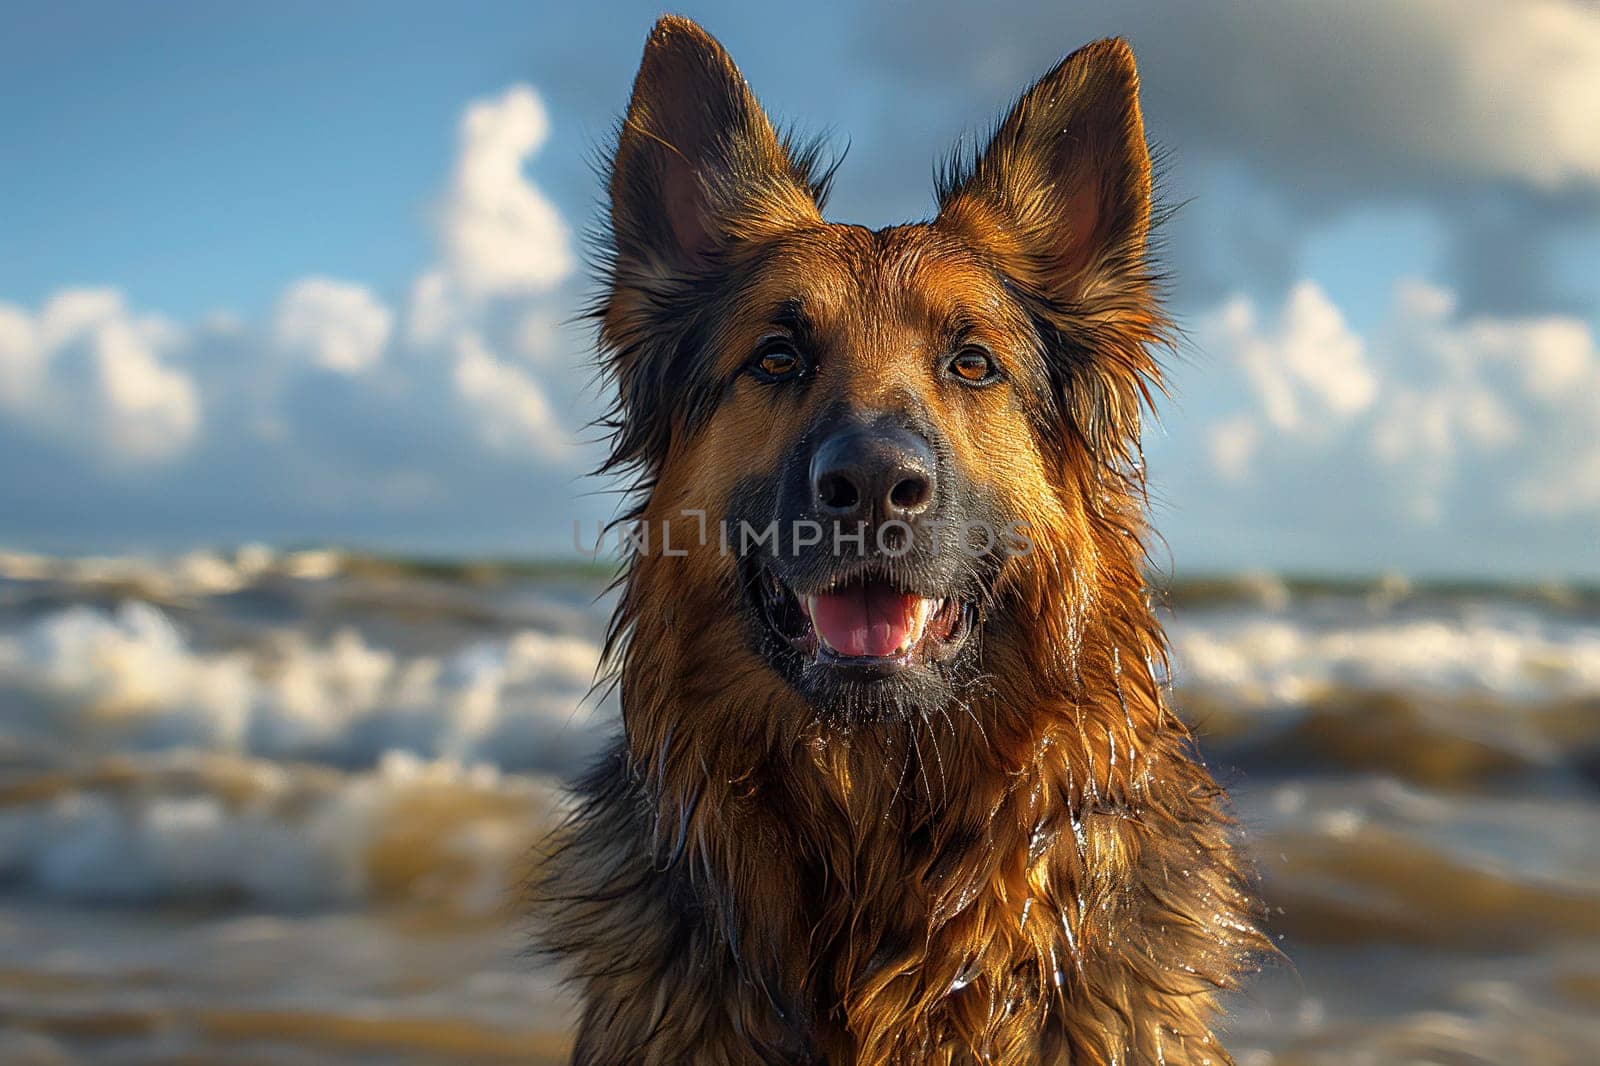 A German shepherd relaxing on the beach during sunset